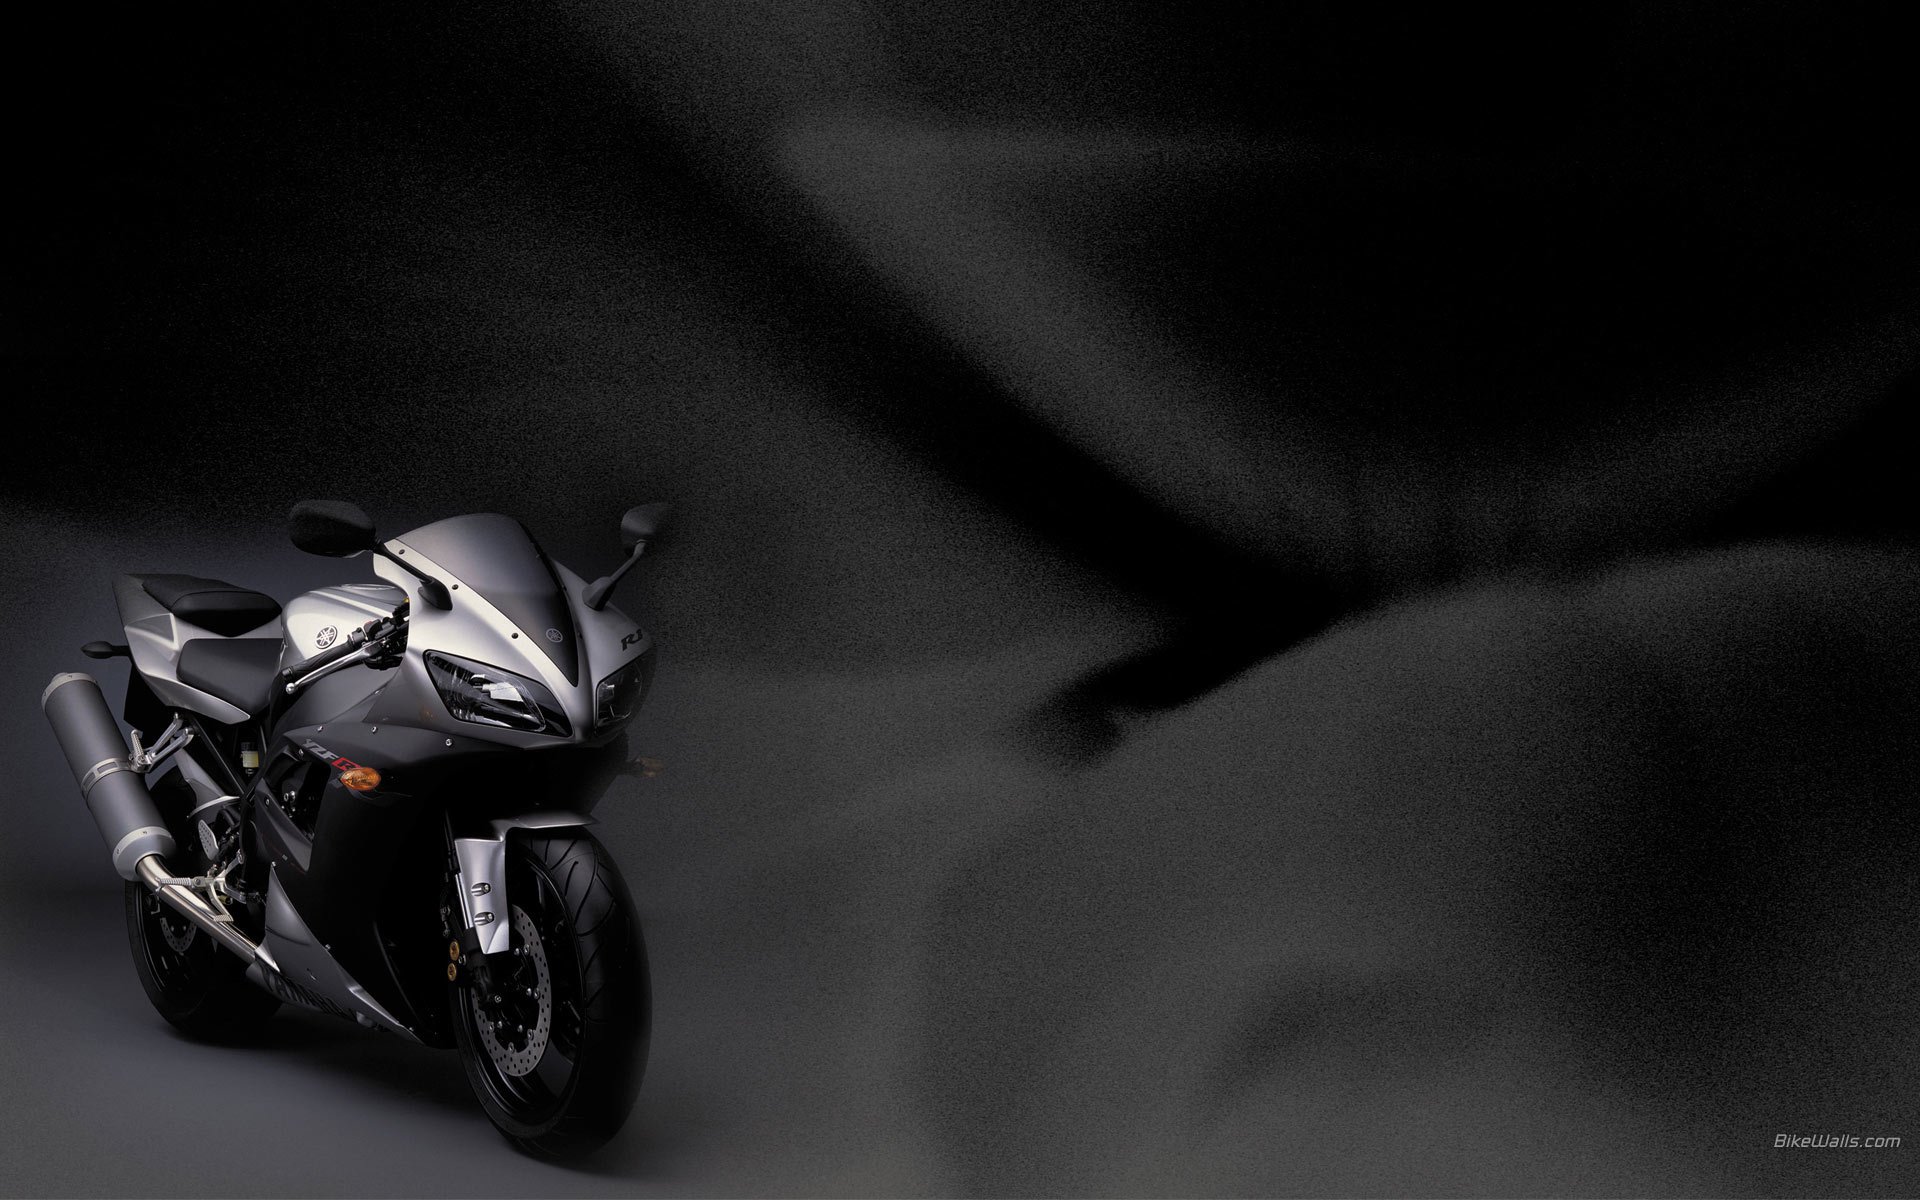 Stylish silver motorcycle on a dark background